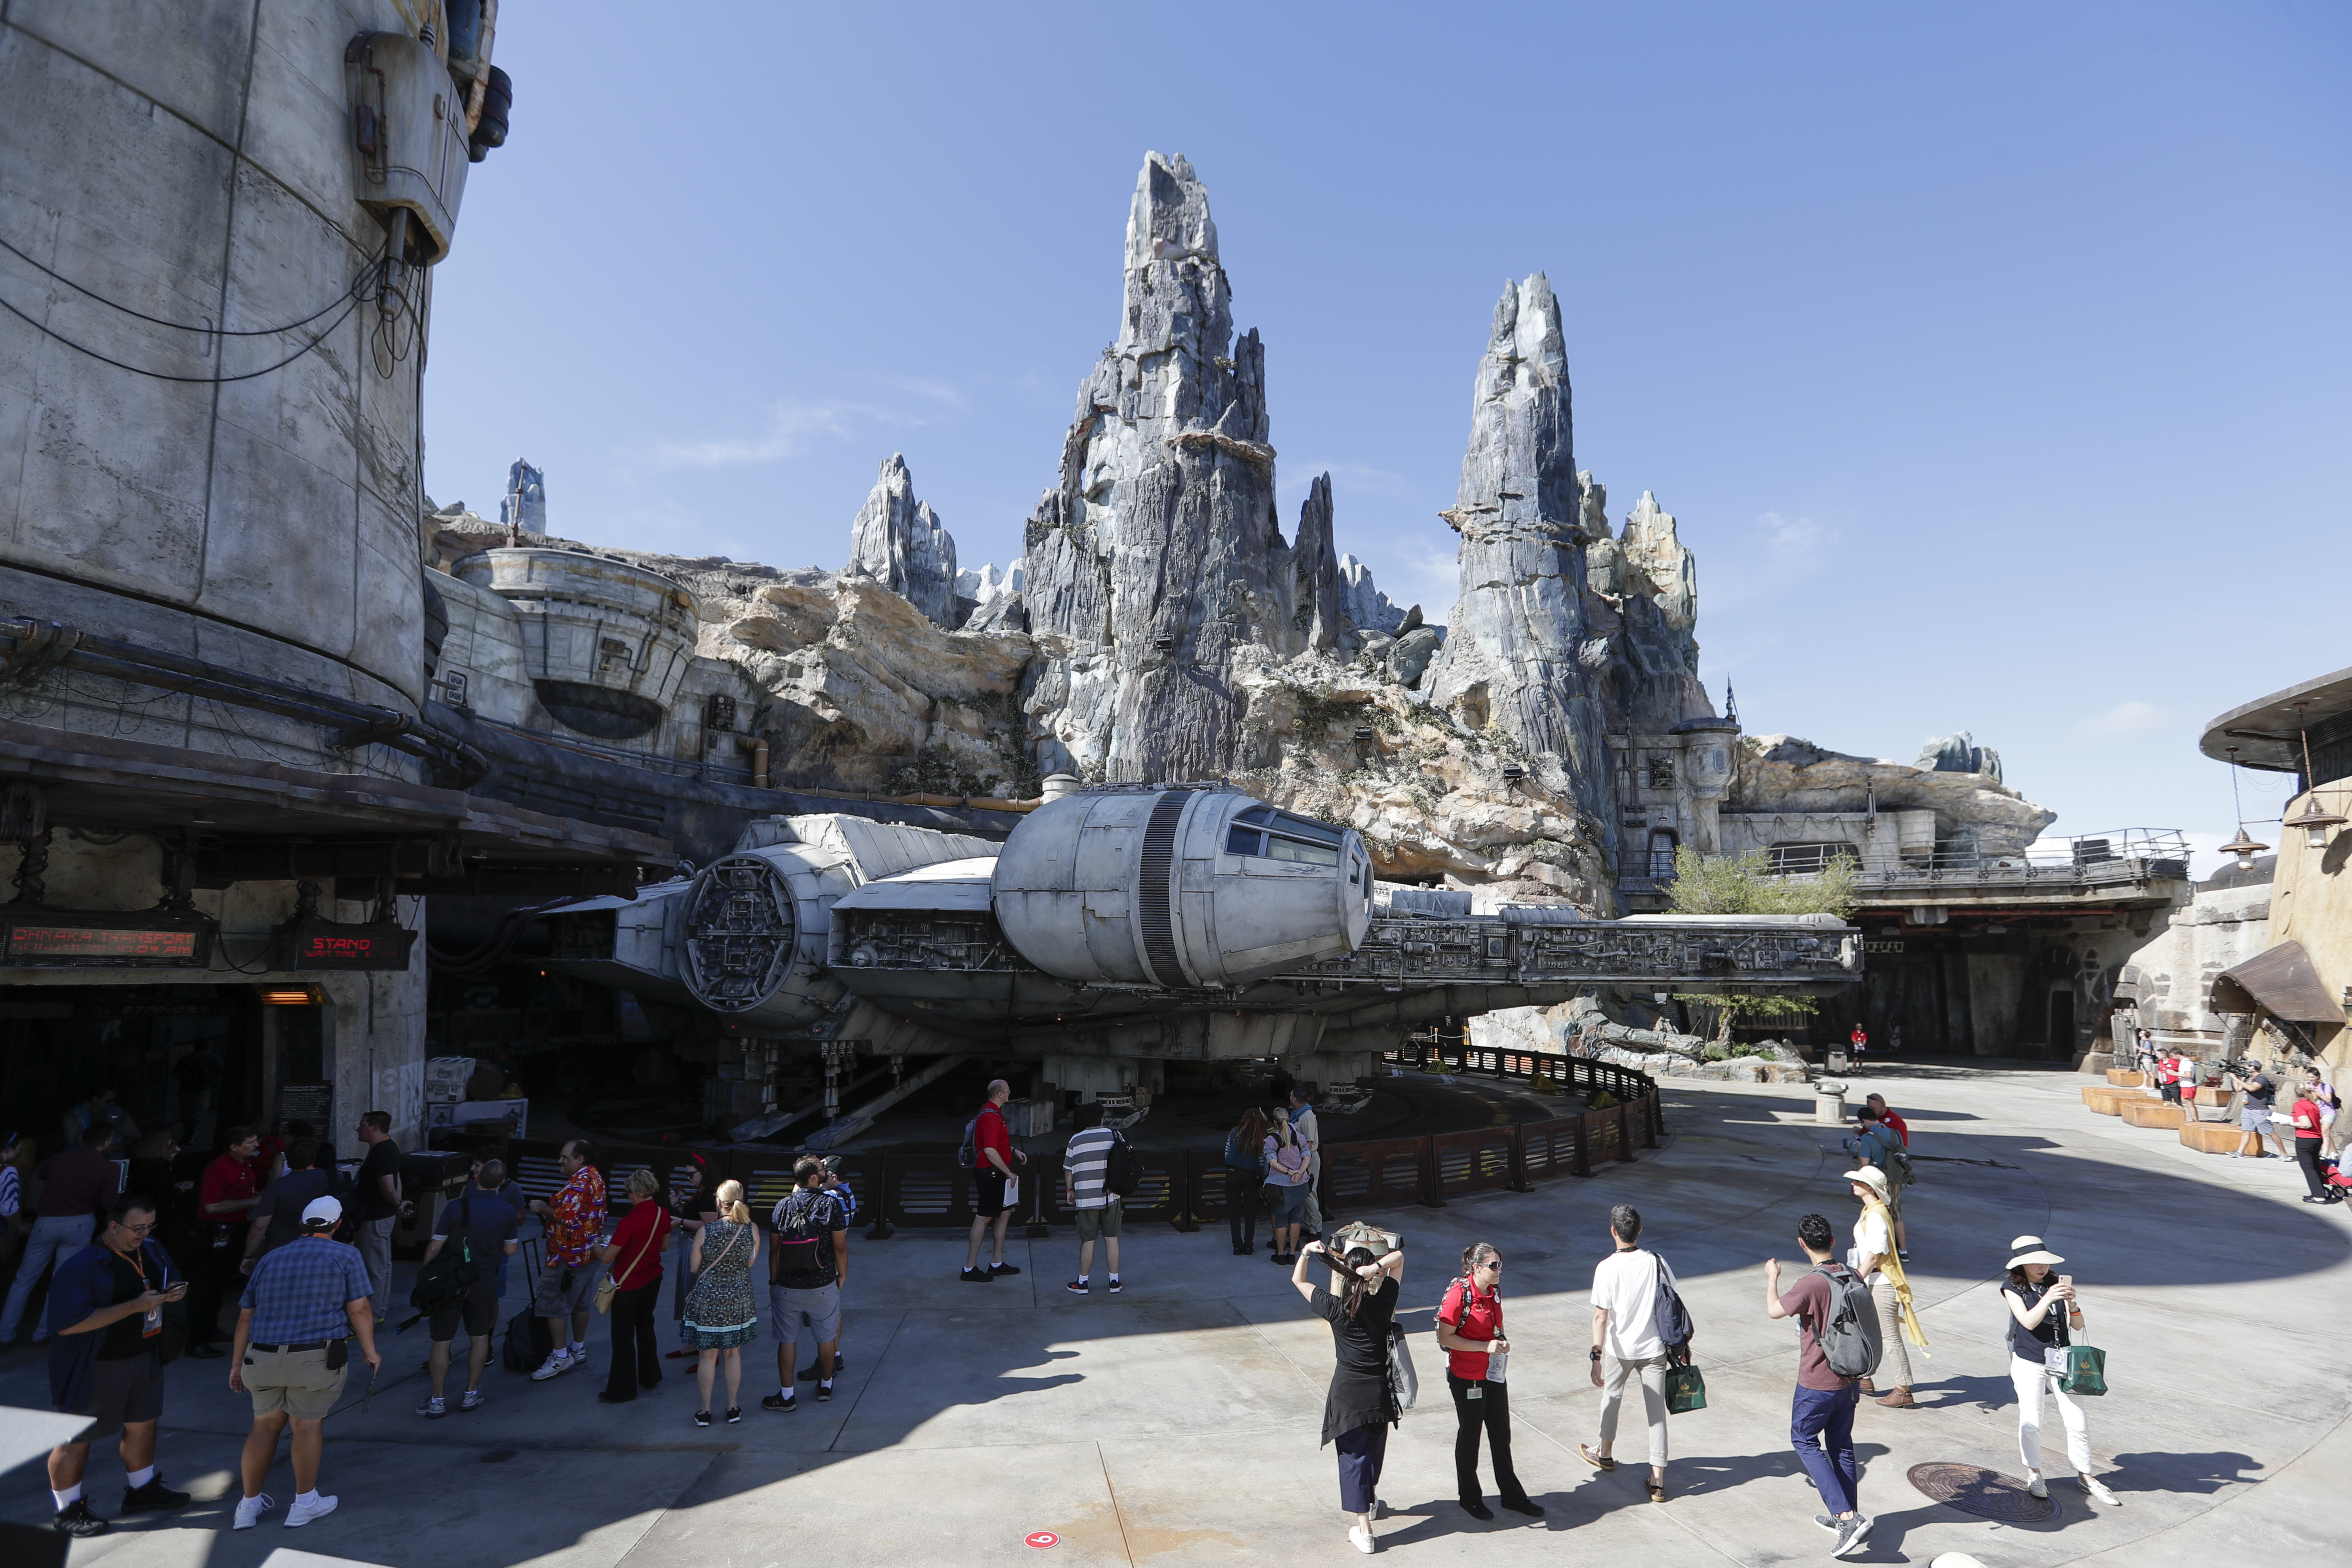 Star Wars hotel at Disney World like a cruise into space | Inquirer News